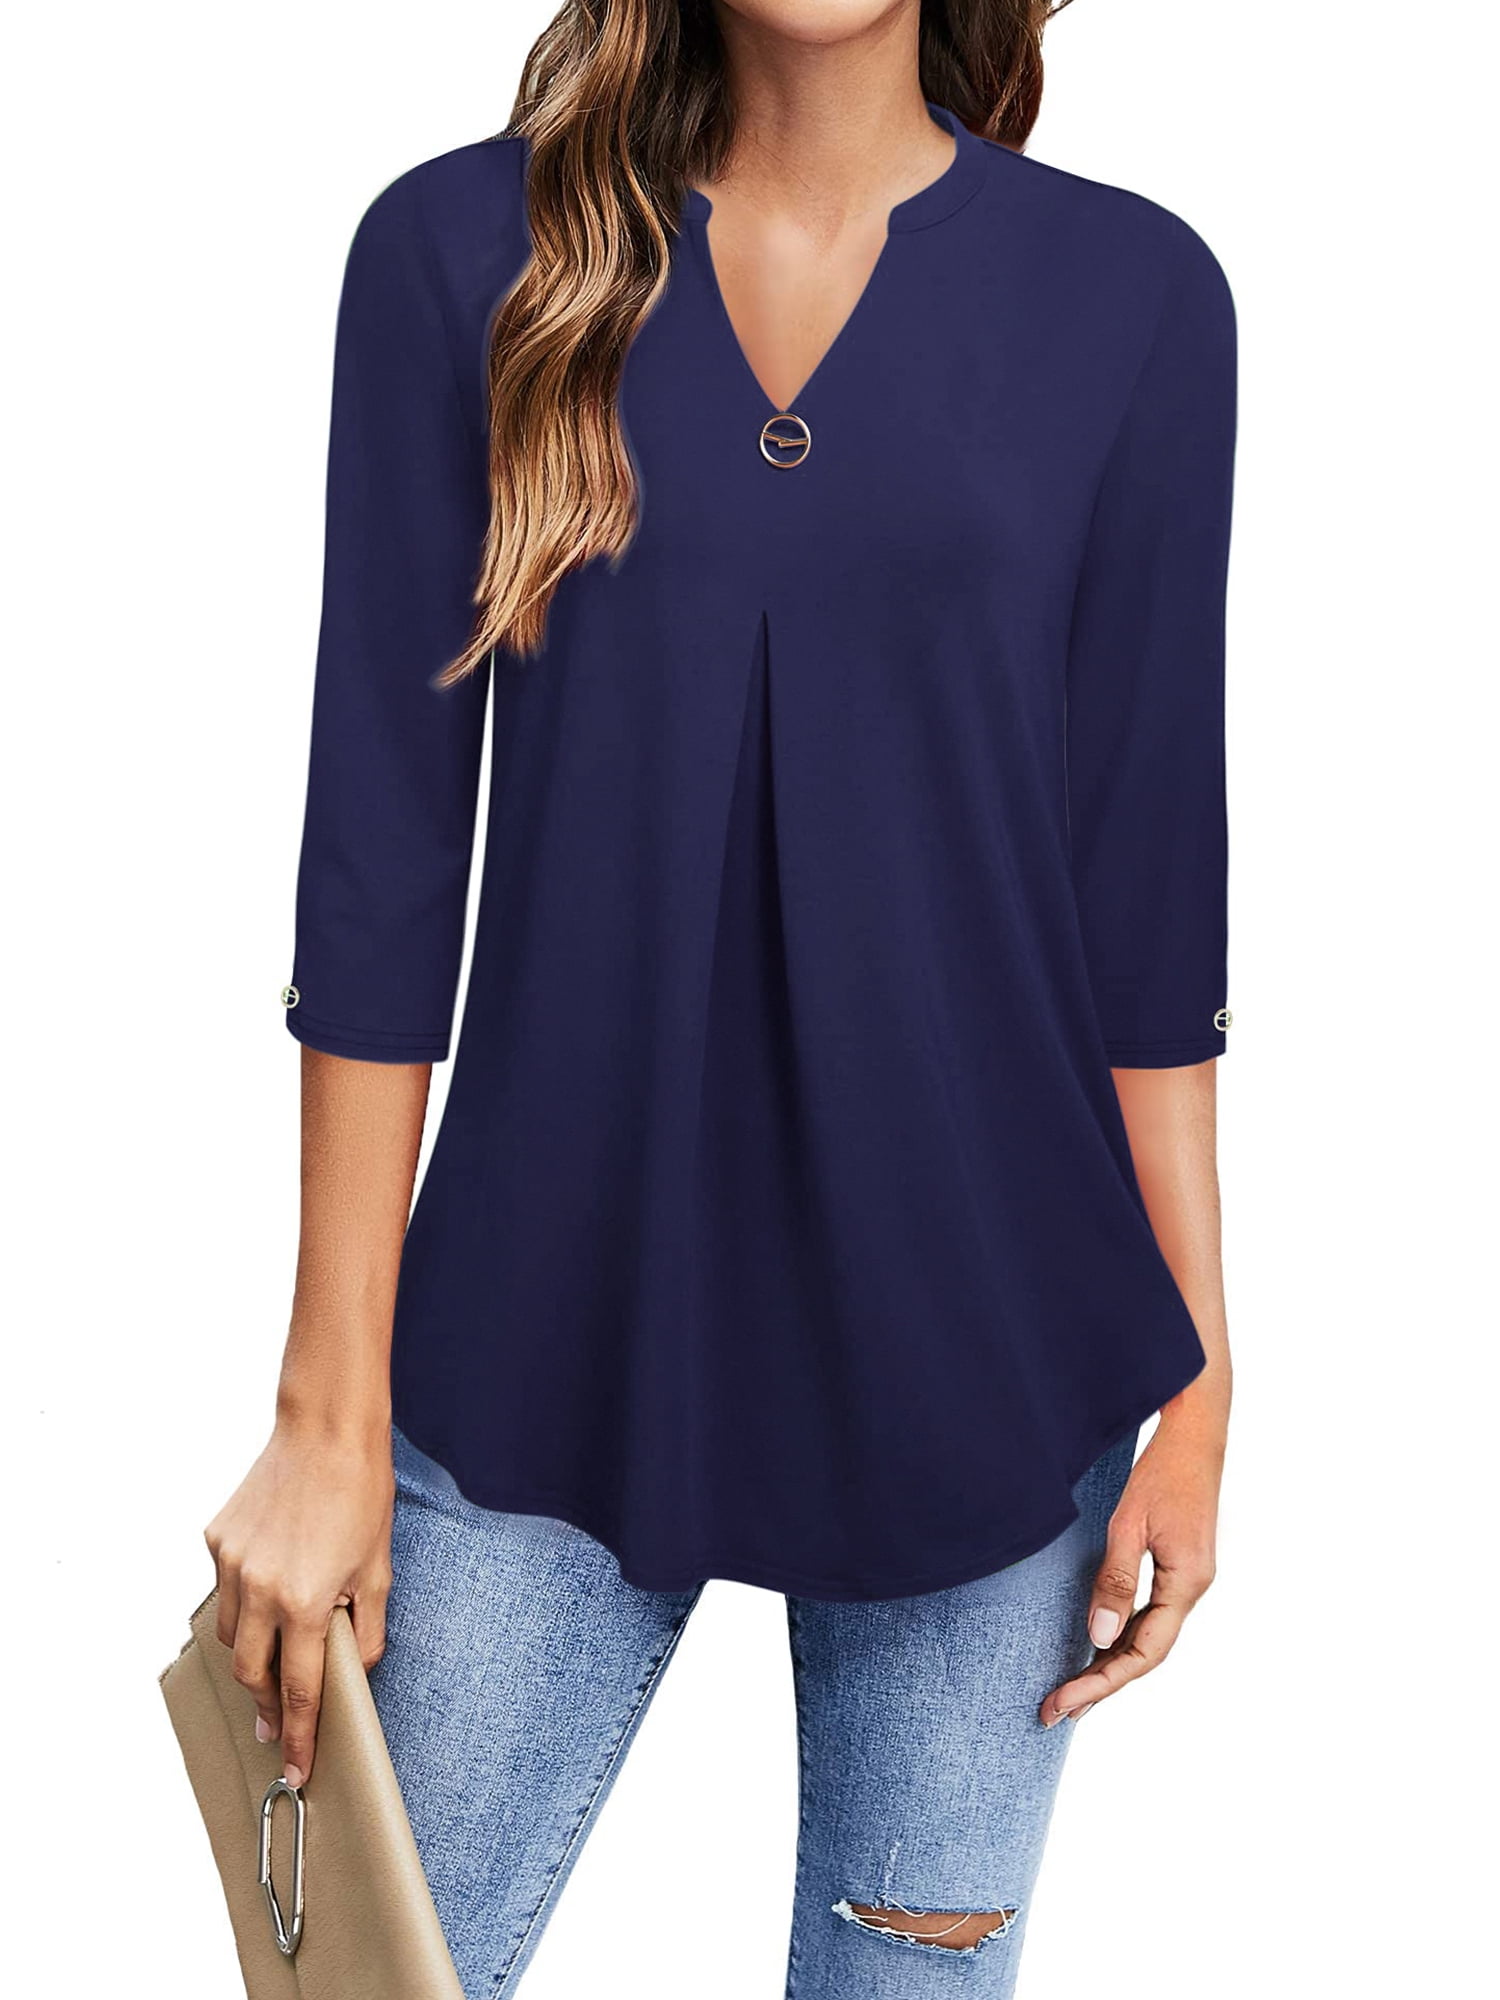 Women's Plus Size V Neck 3/4 Sleeve Shits Flowy Pleated Tunic Tops ...